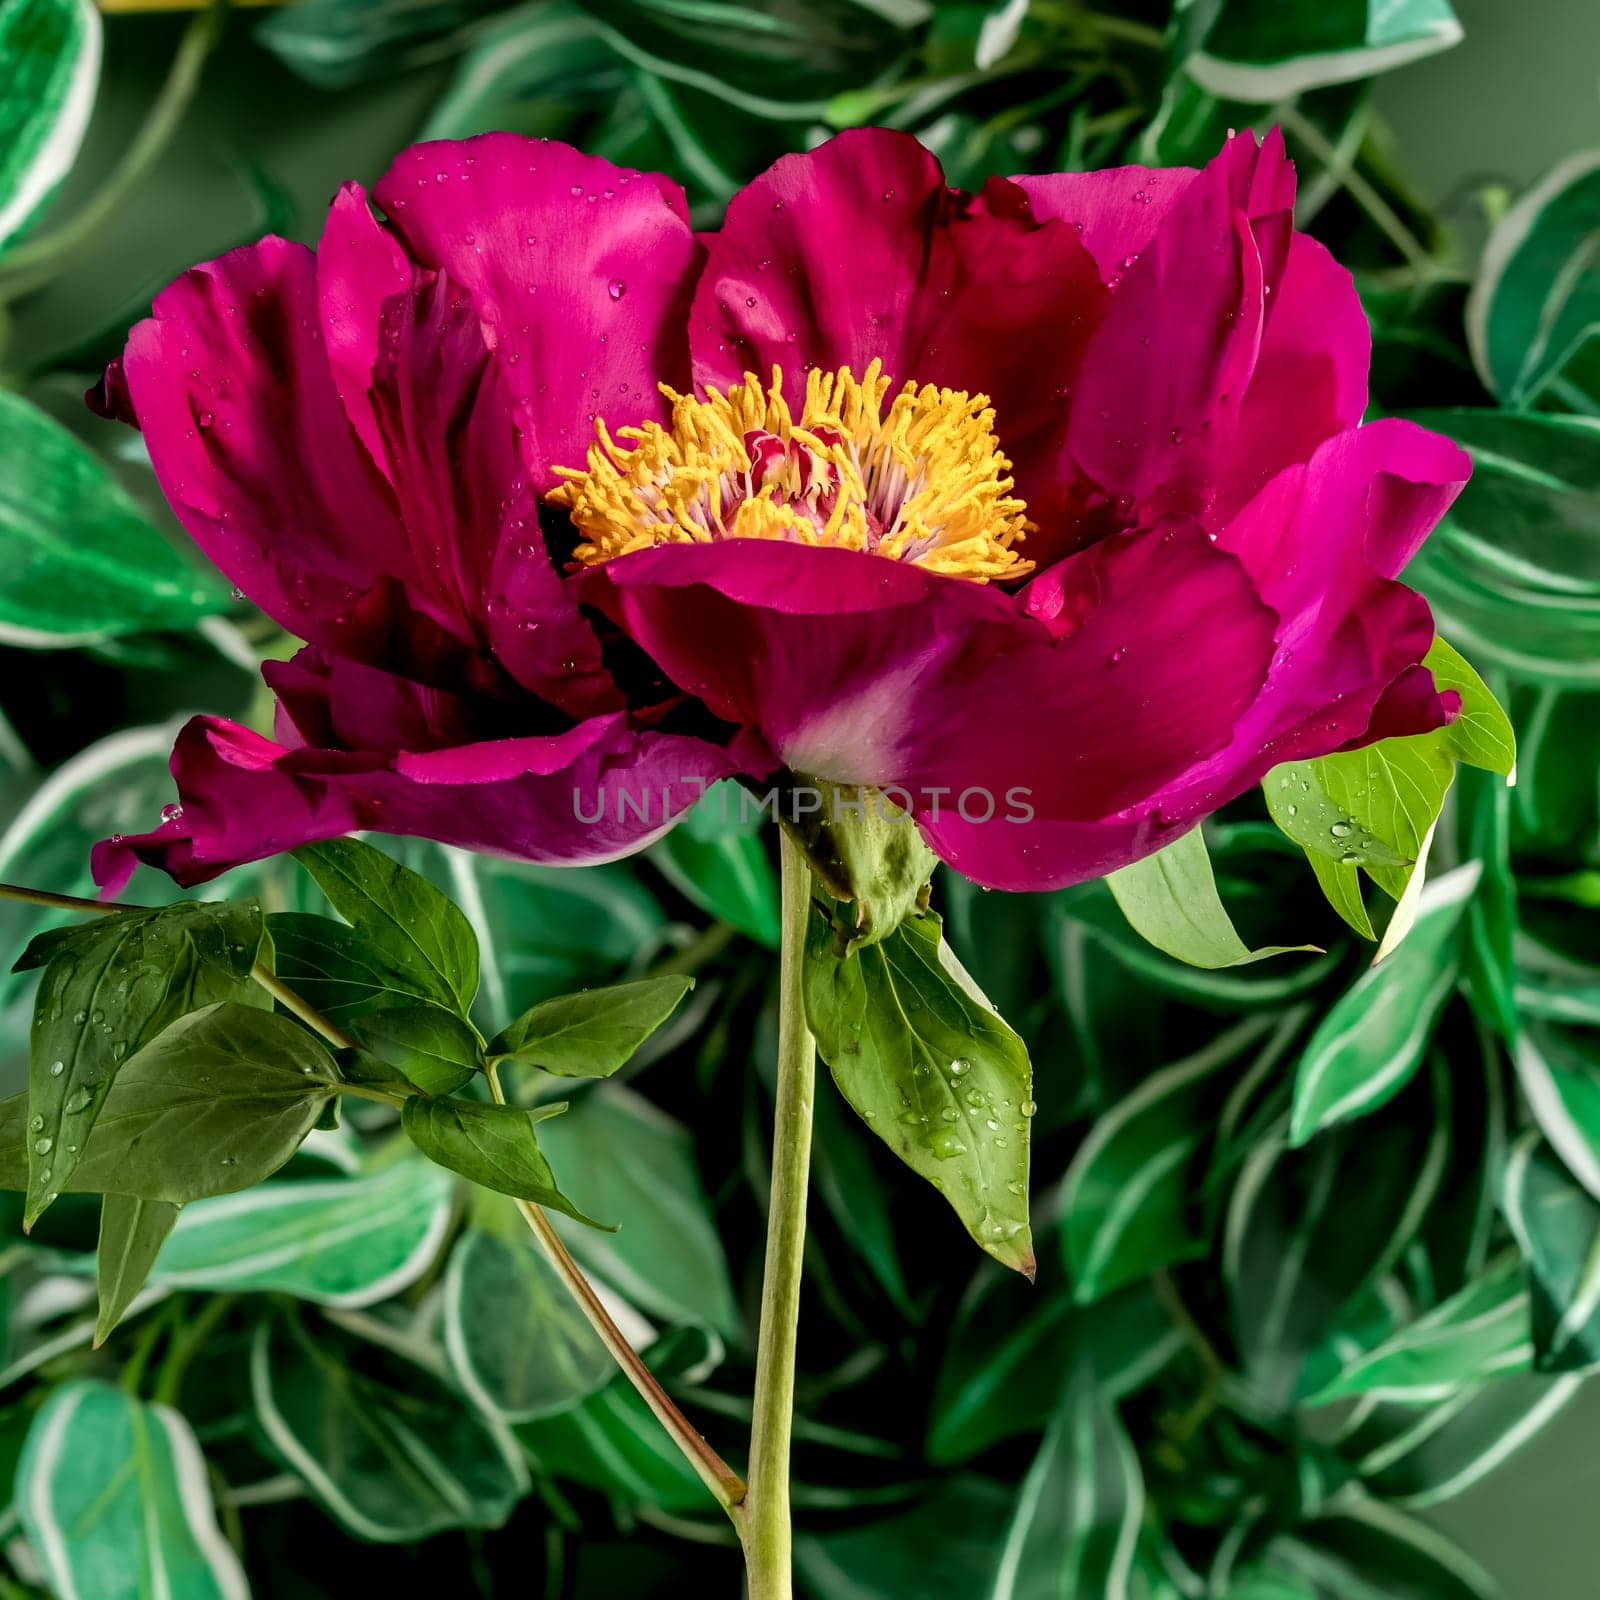 Beautiful Blooming red peony on a green leaves background. Flower head close-up.